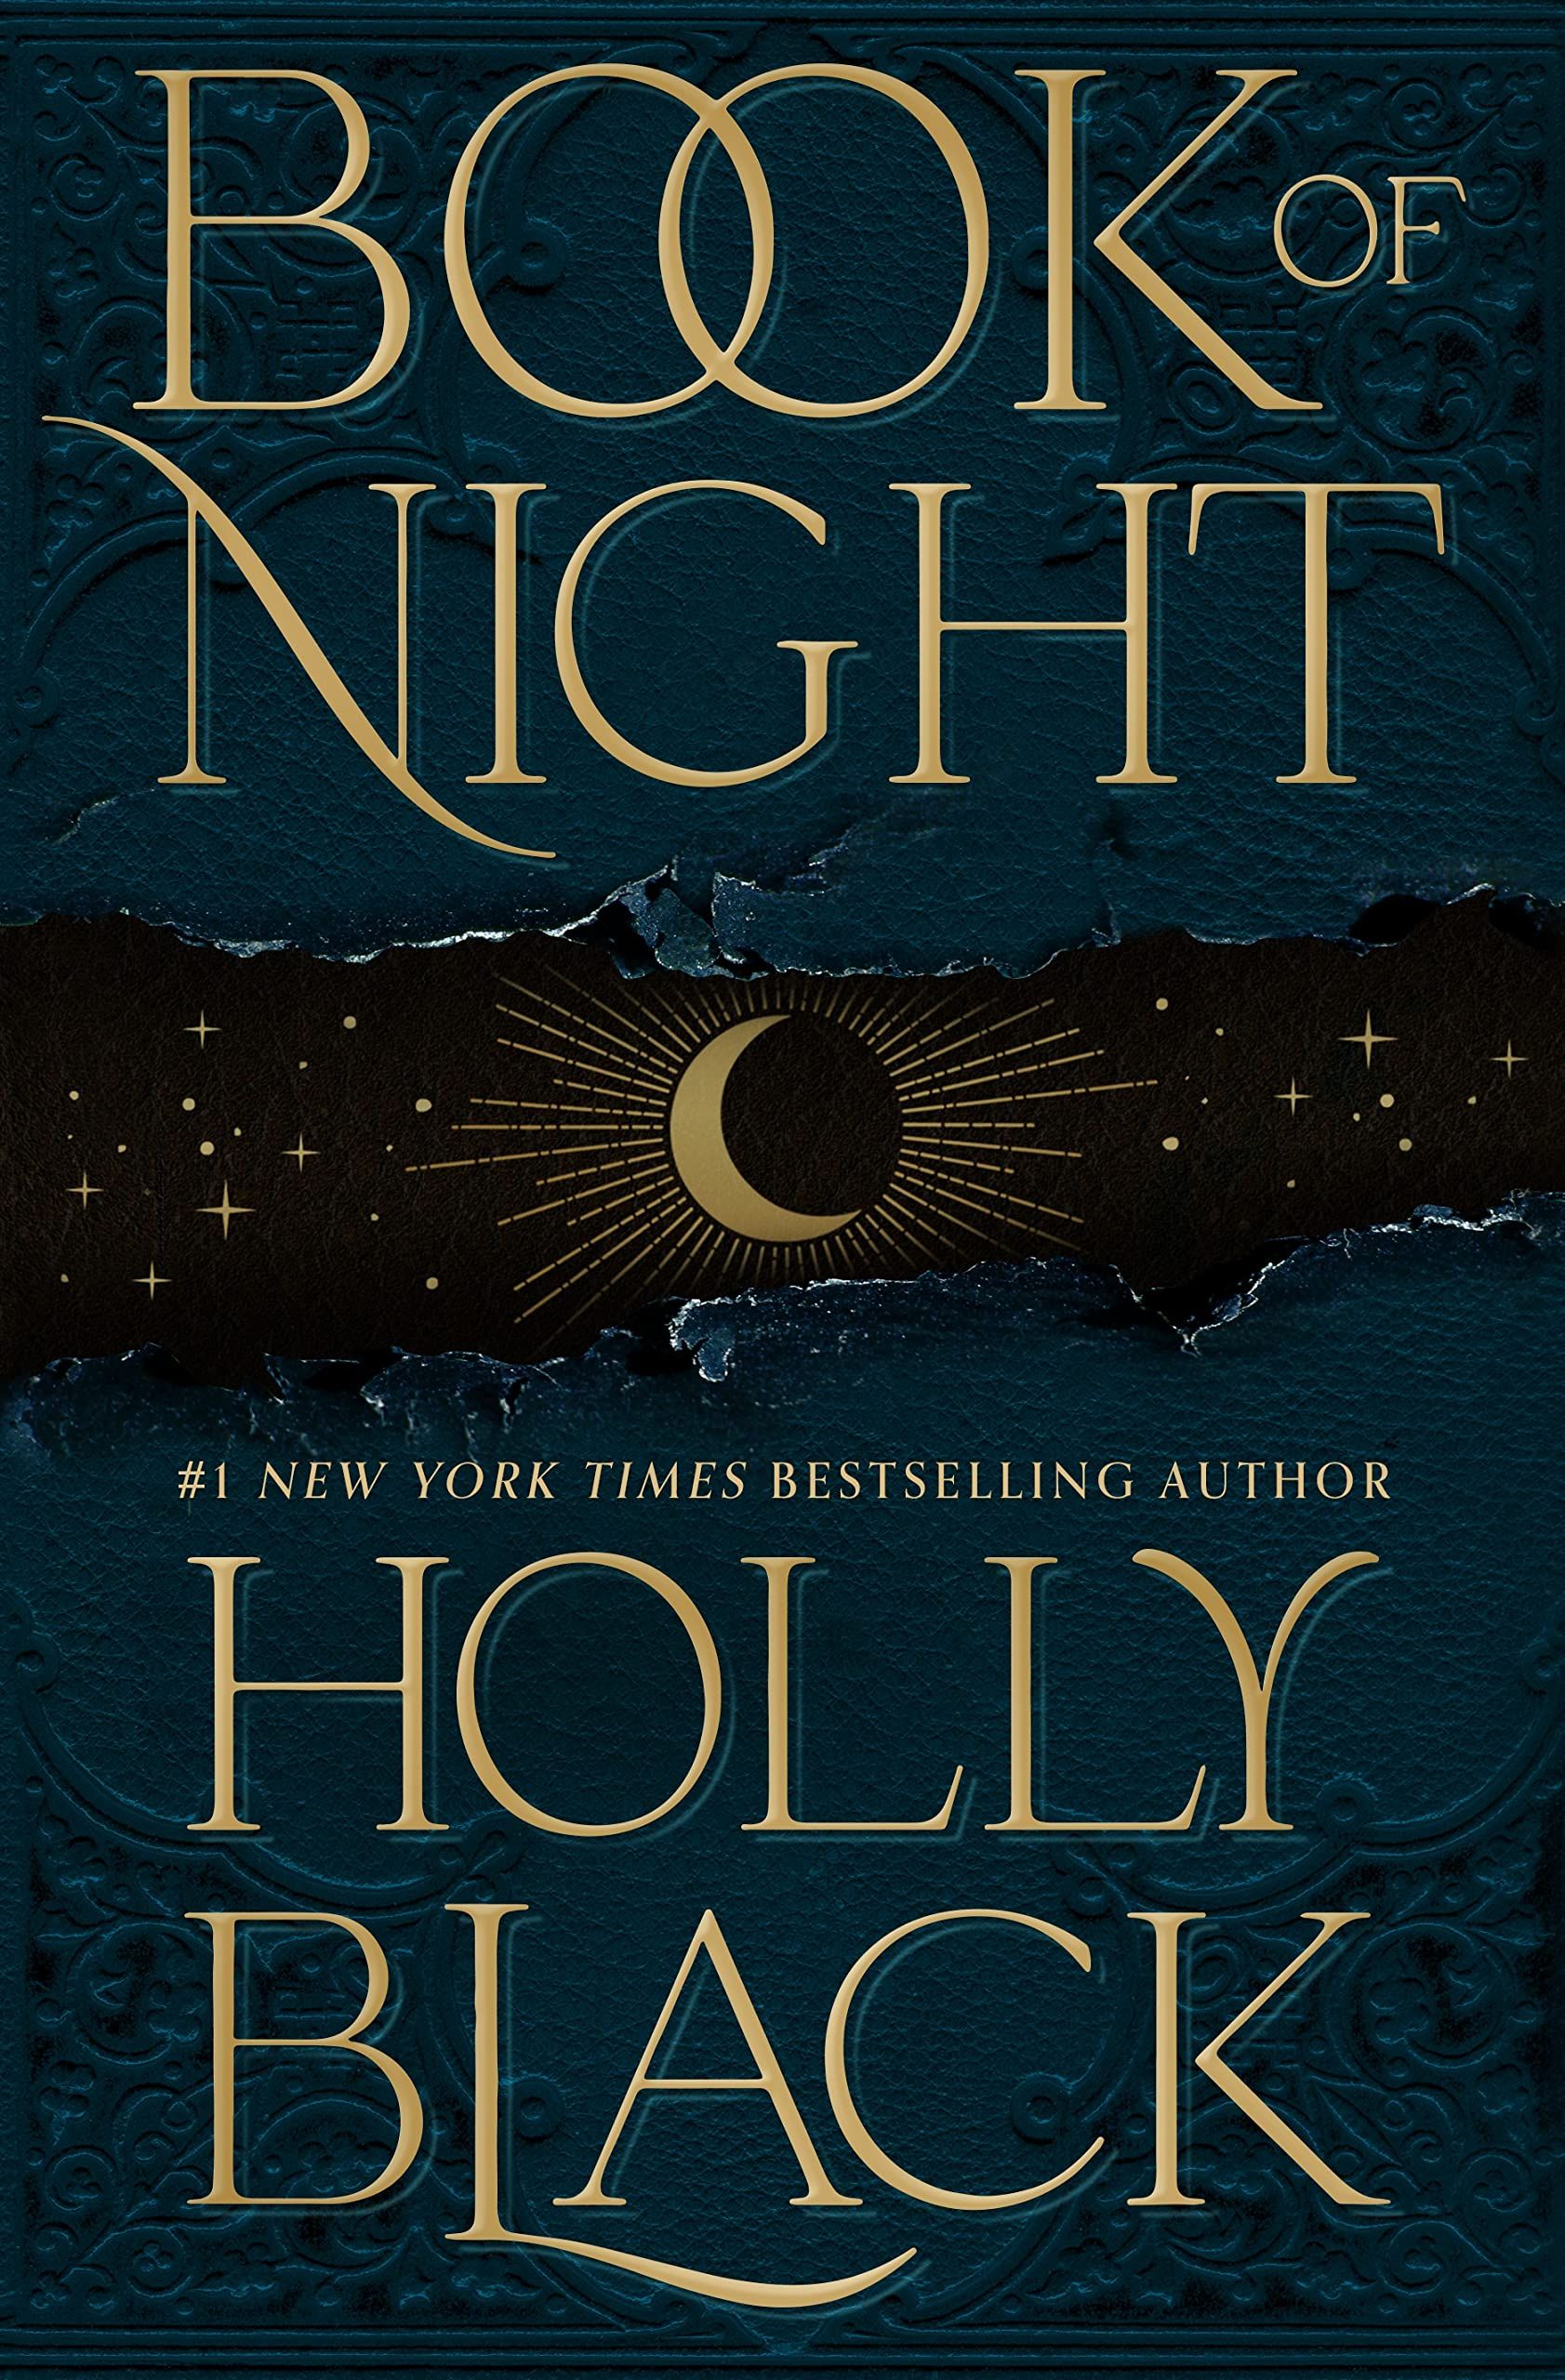 Cover image of Book of Night by Holly Black.